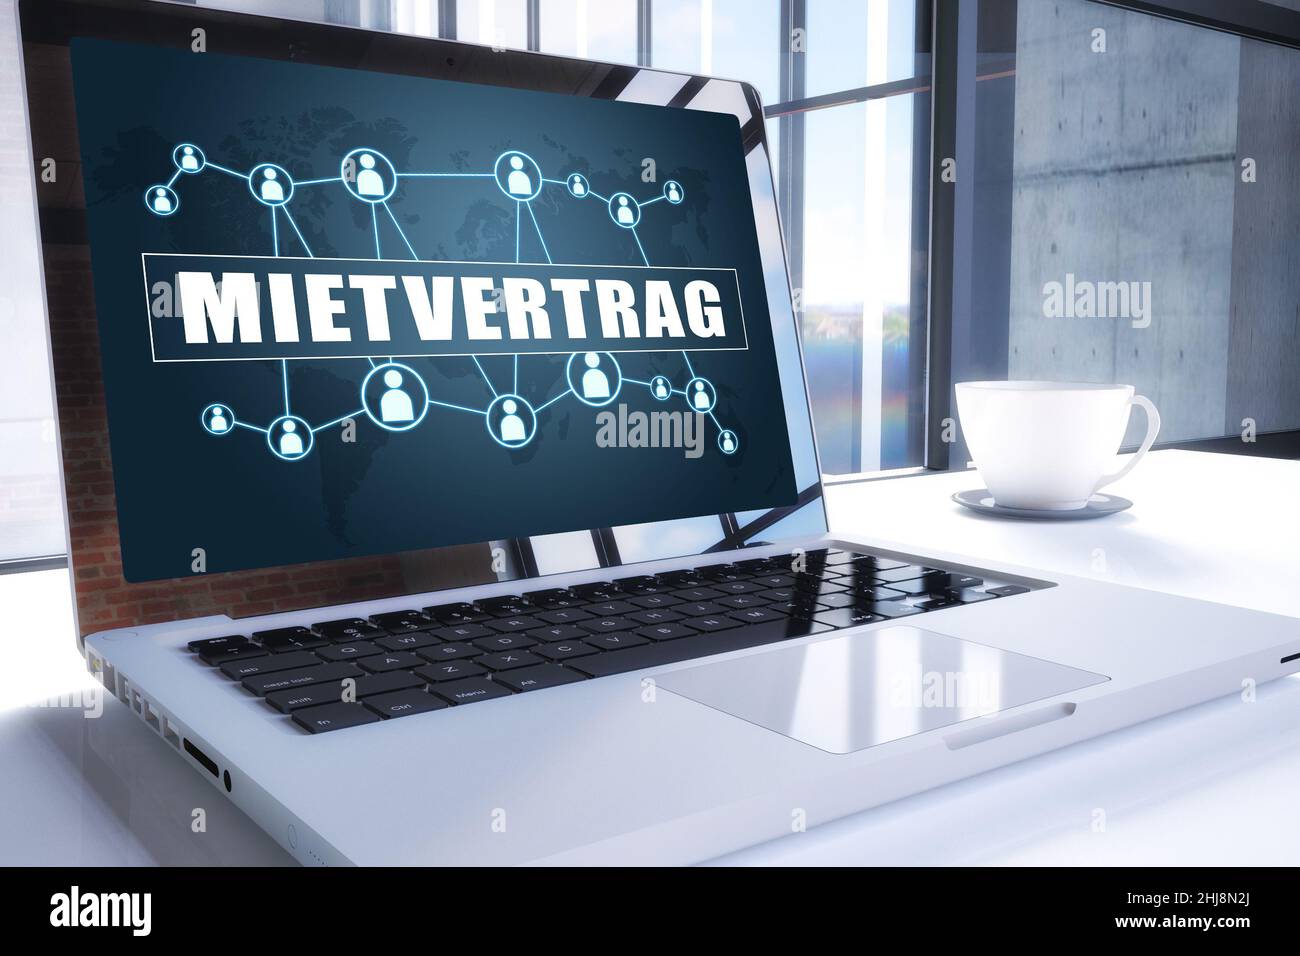 Mietvertrag - german word for rent contract or lease agreement. Text on modern laptop screen in office environment. 3D render illustration business te Stock Photo